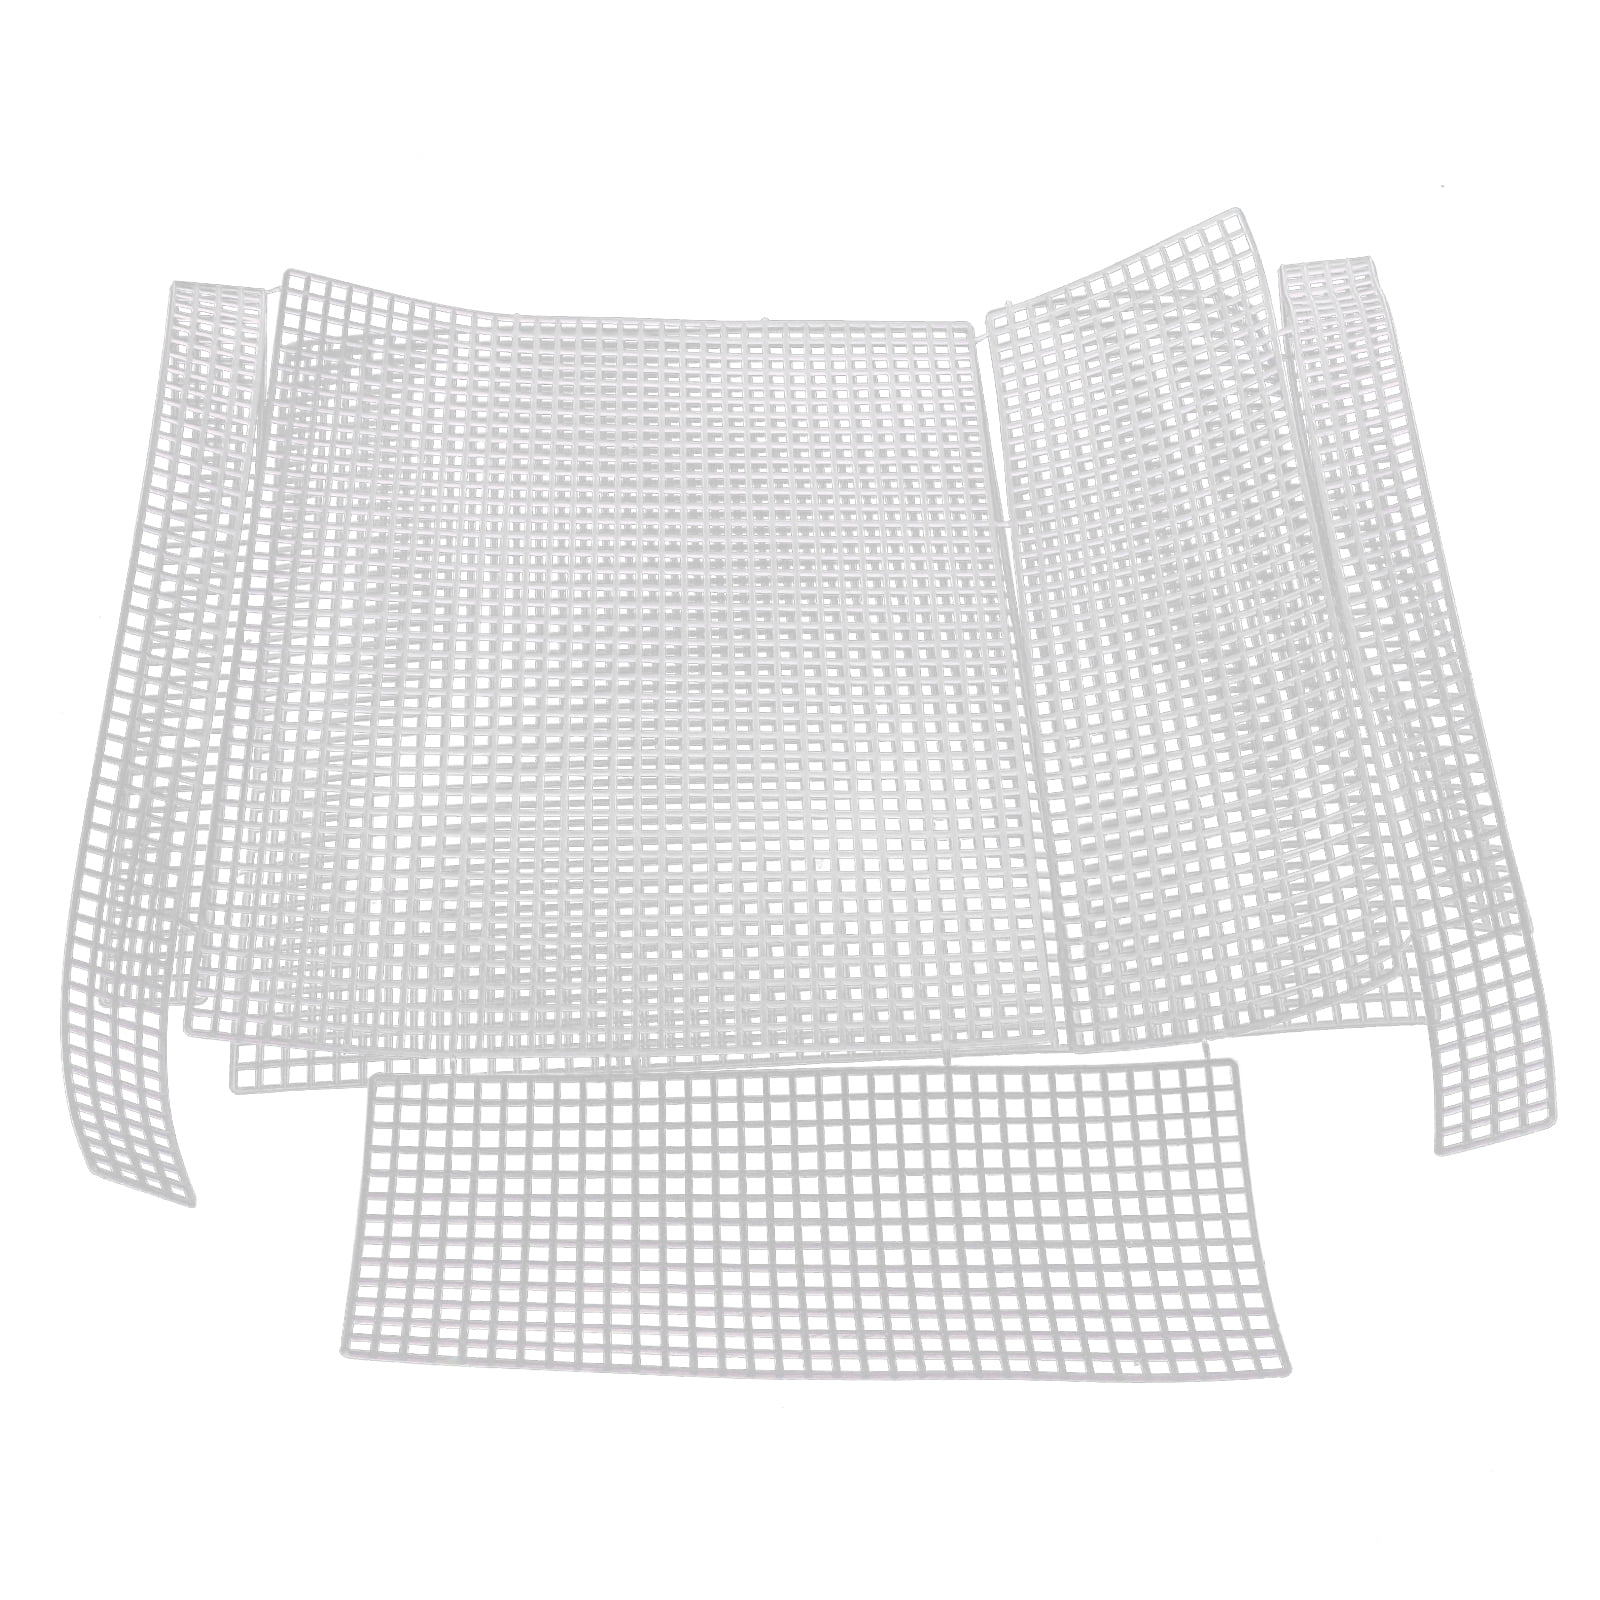 2pcs 4mm White Square Mesh Plastic Grid Panel For Handmade Bag Shaping And  Accessories Diy